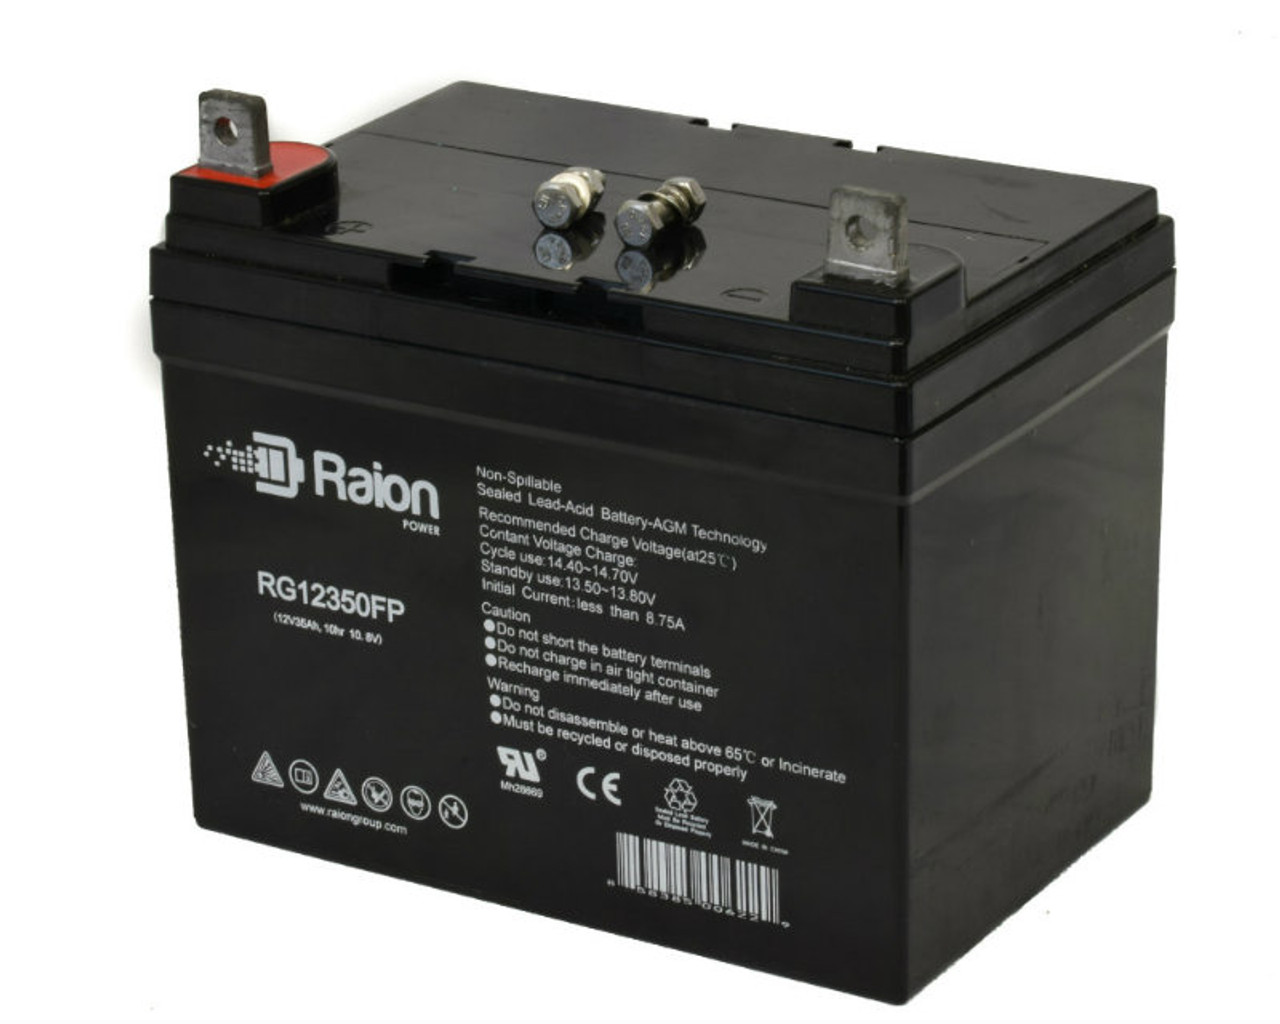 Raion Power Replacement 12V 35Ah Battery for Power Energy DC12-35 - 1 Pack